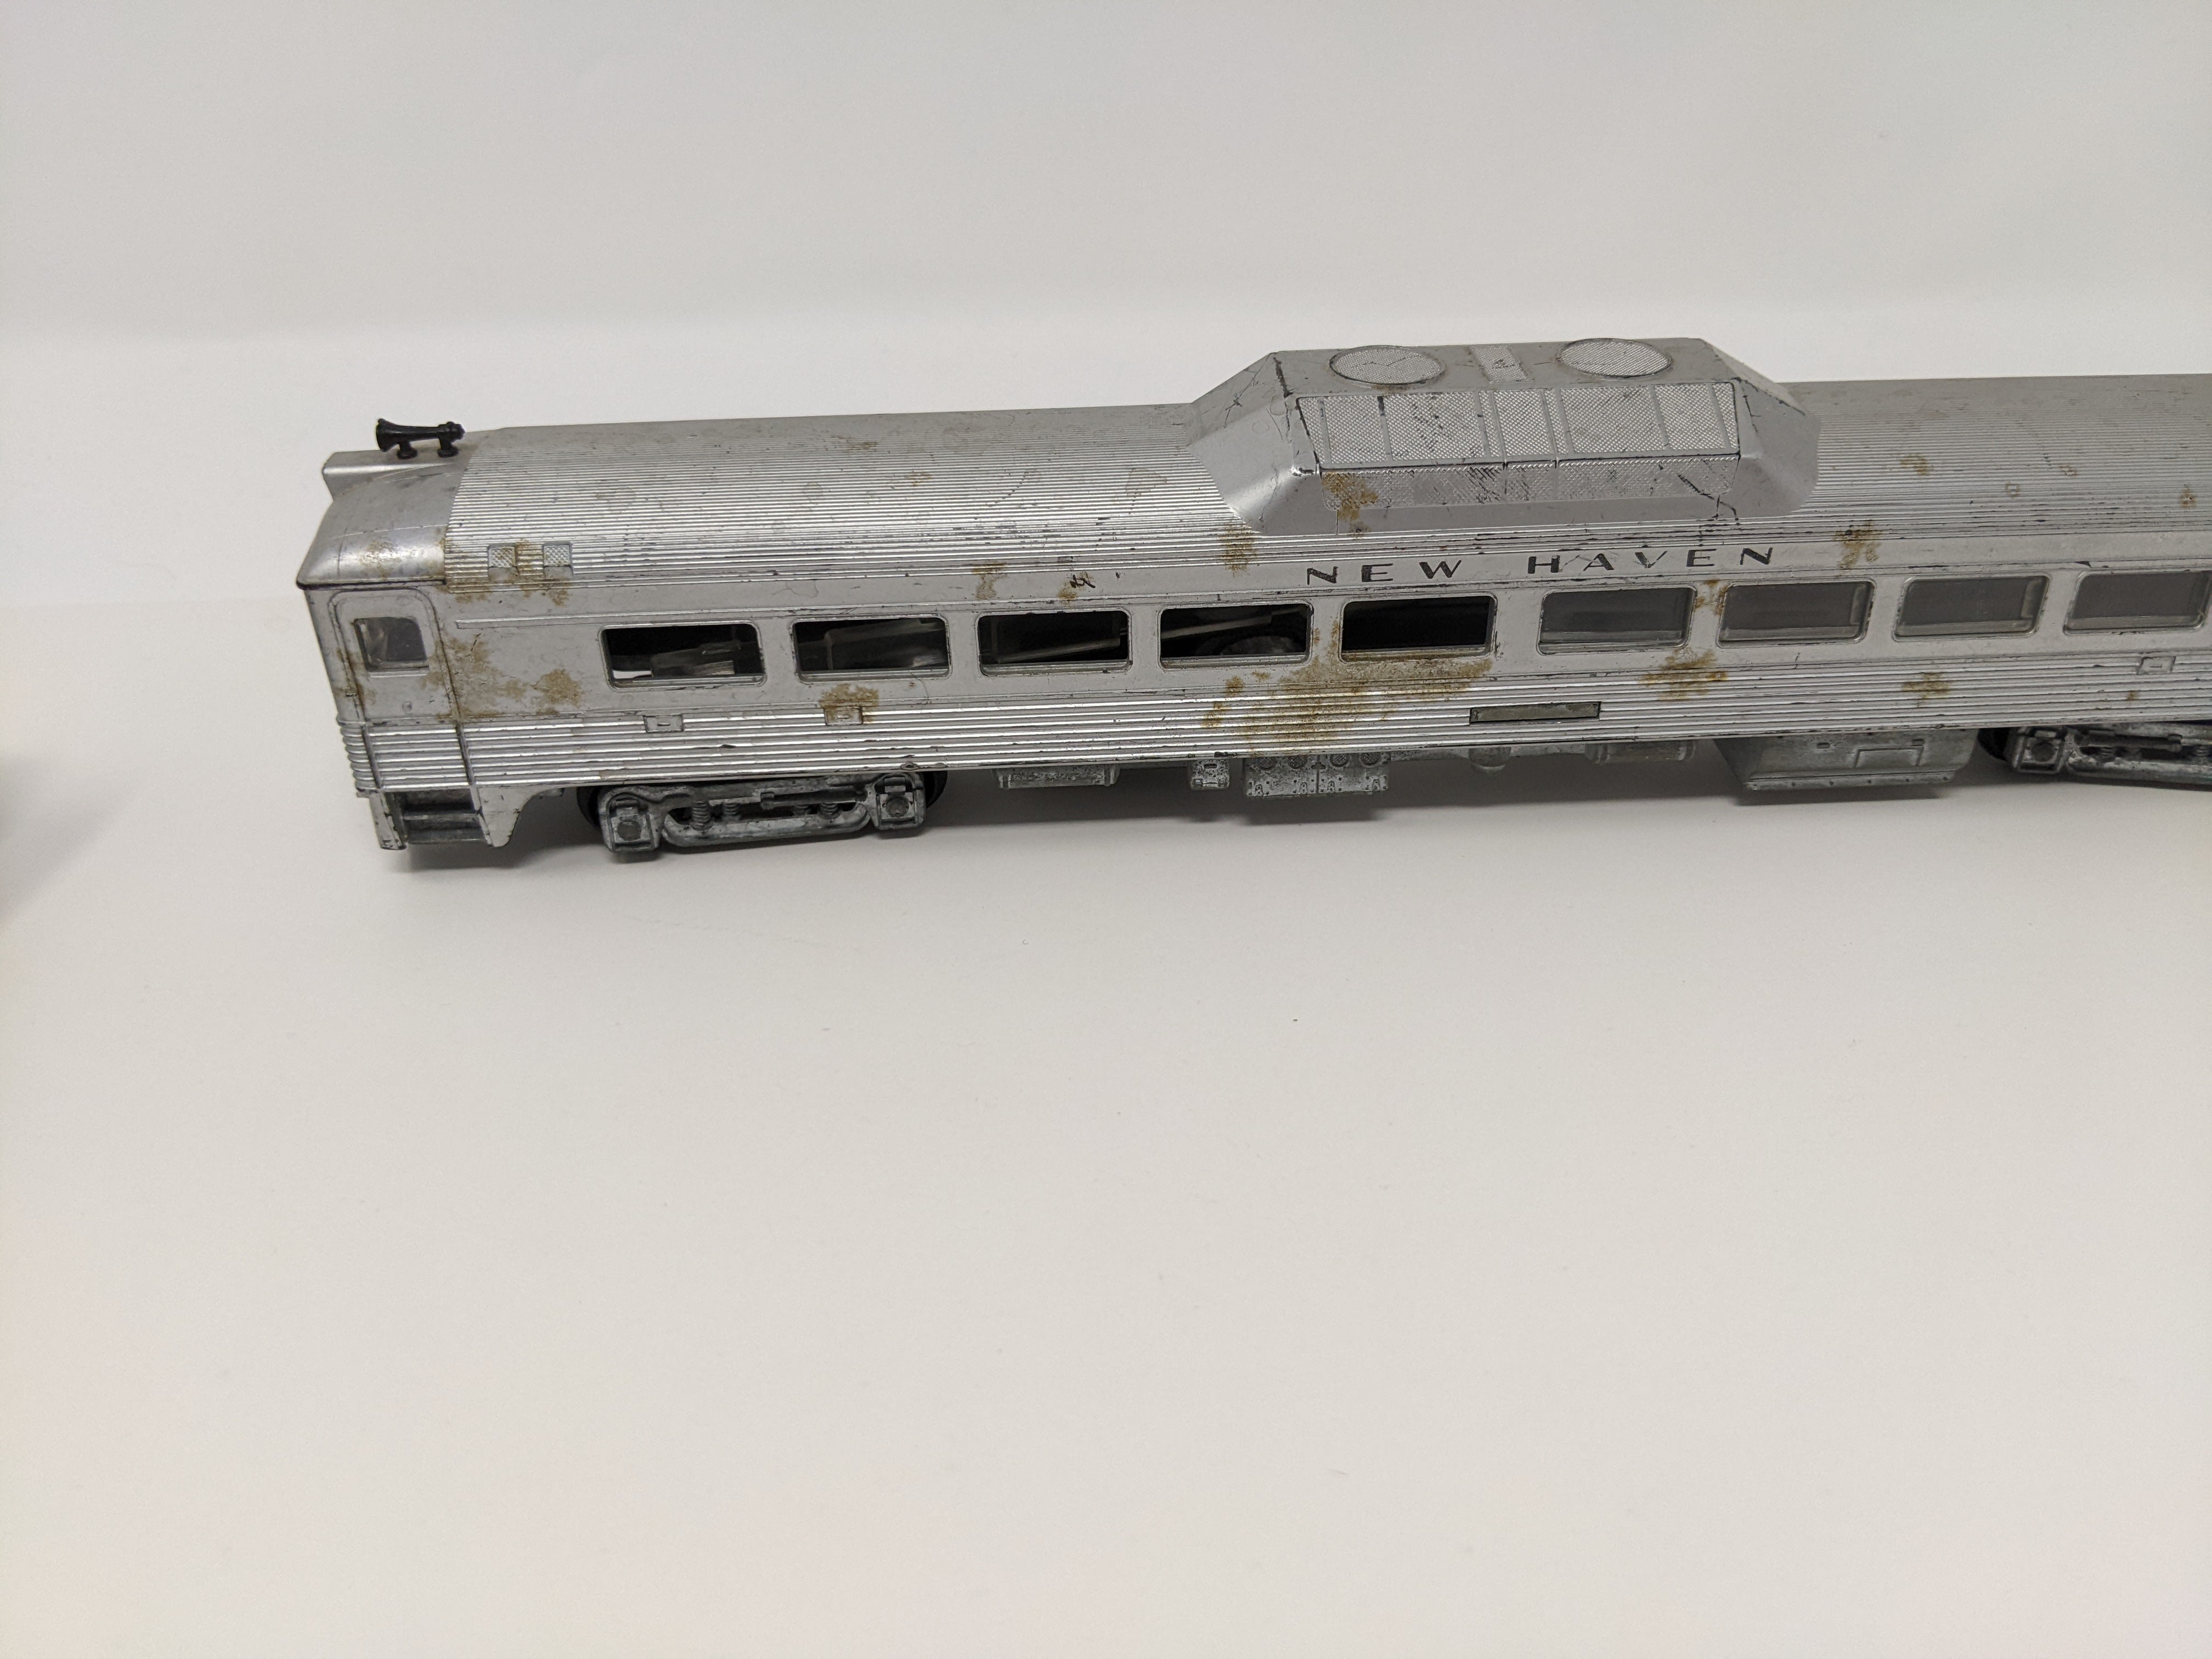 USED Athearn HO Scale, Lot of 2 Budd Cars (for parts or repairs), New Haven